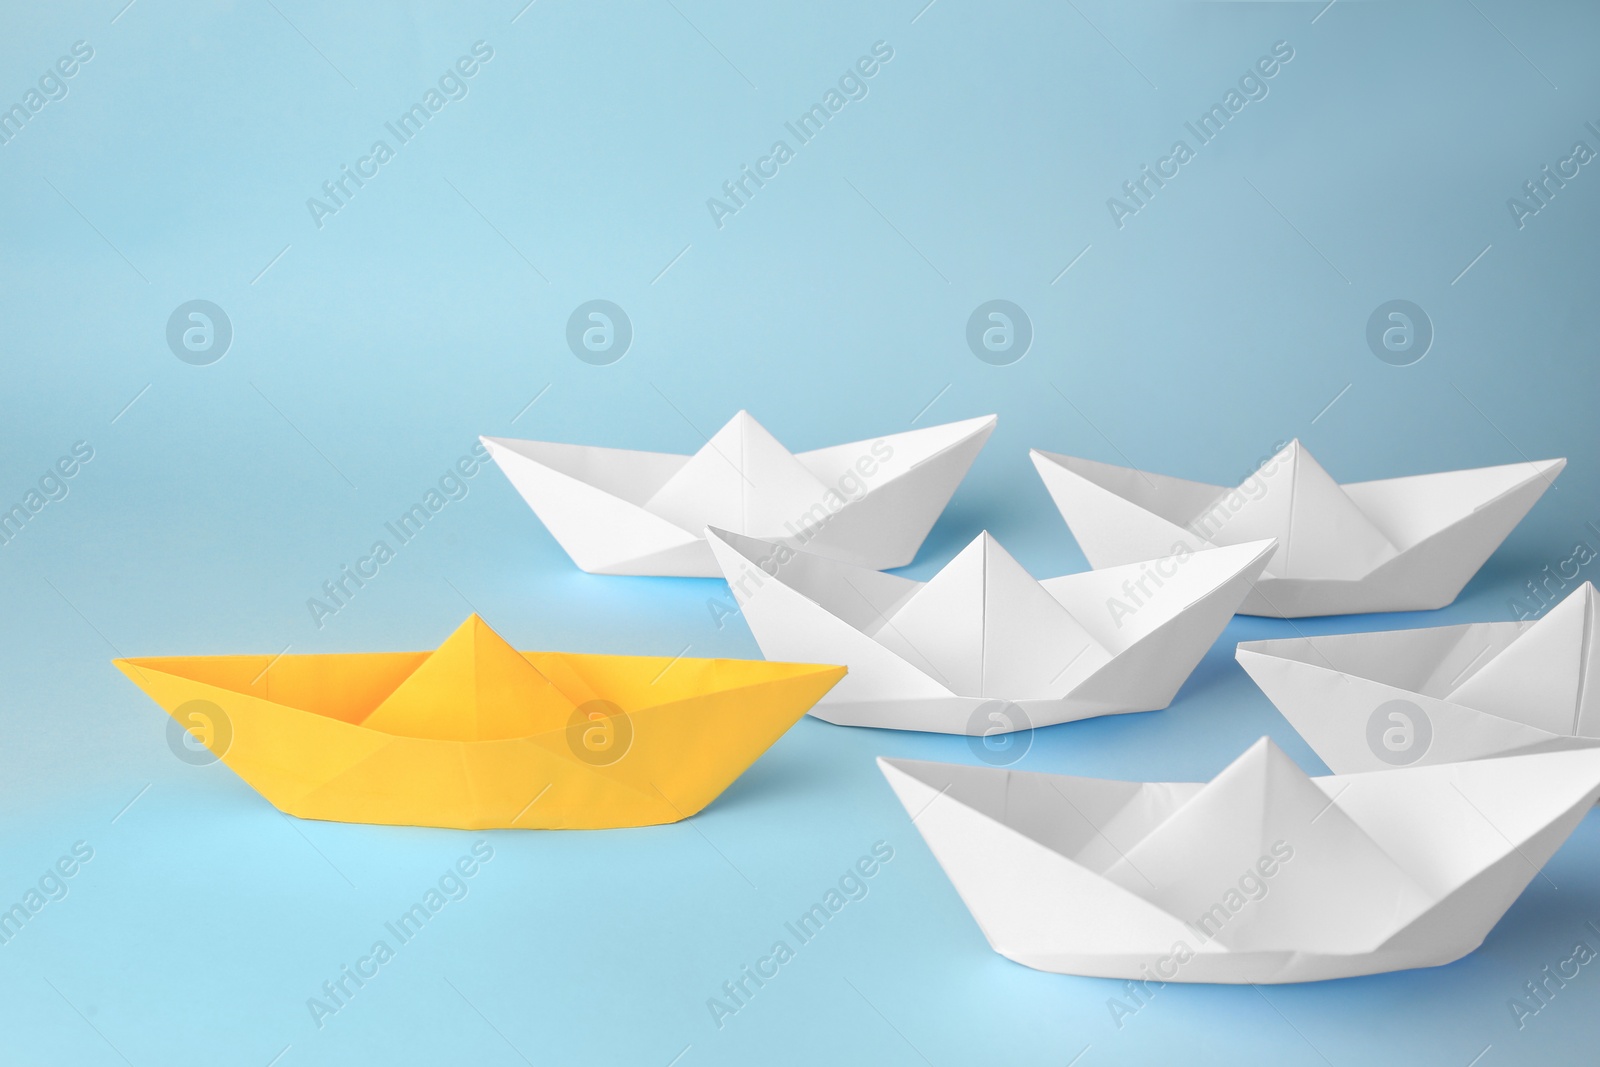 Photo of Group of paper boats following yellow one on light blue background. Leadership concept